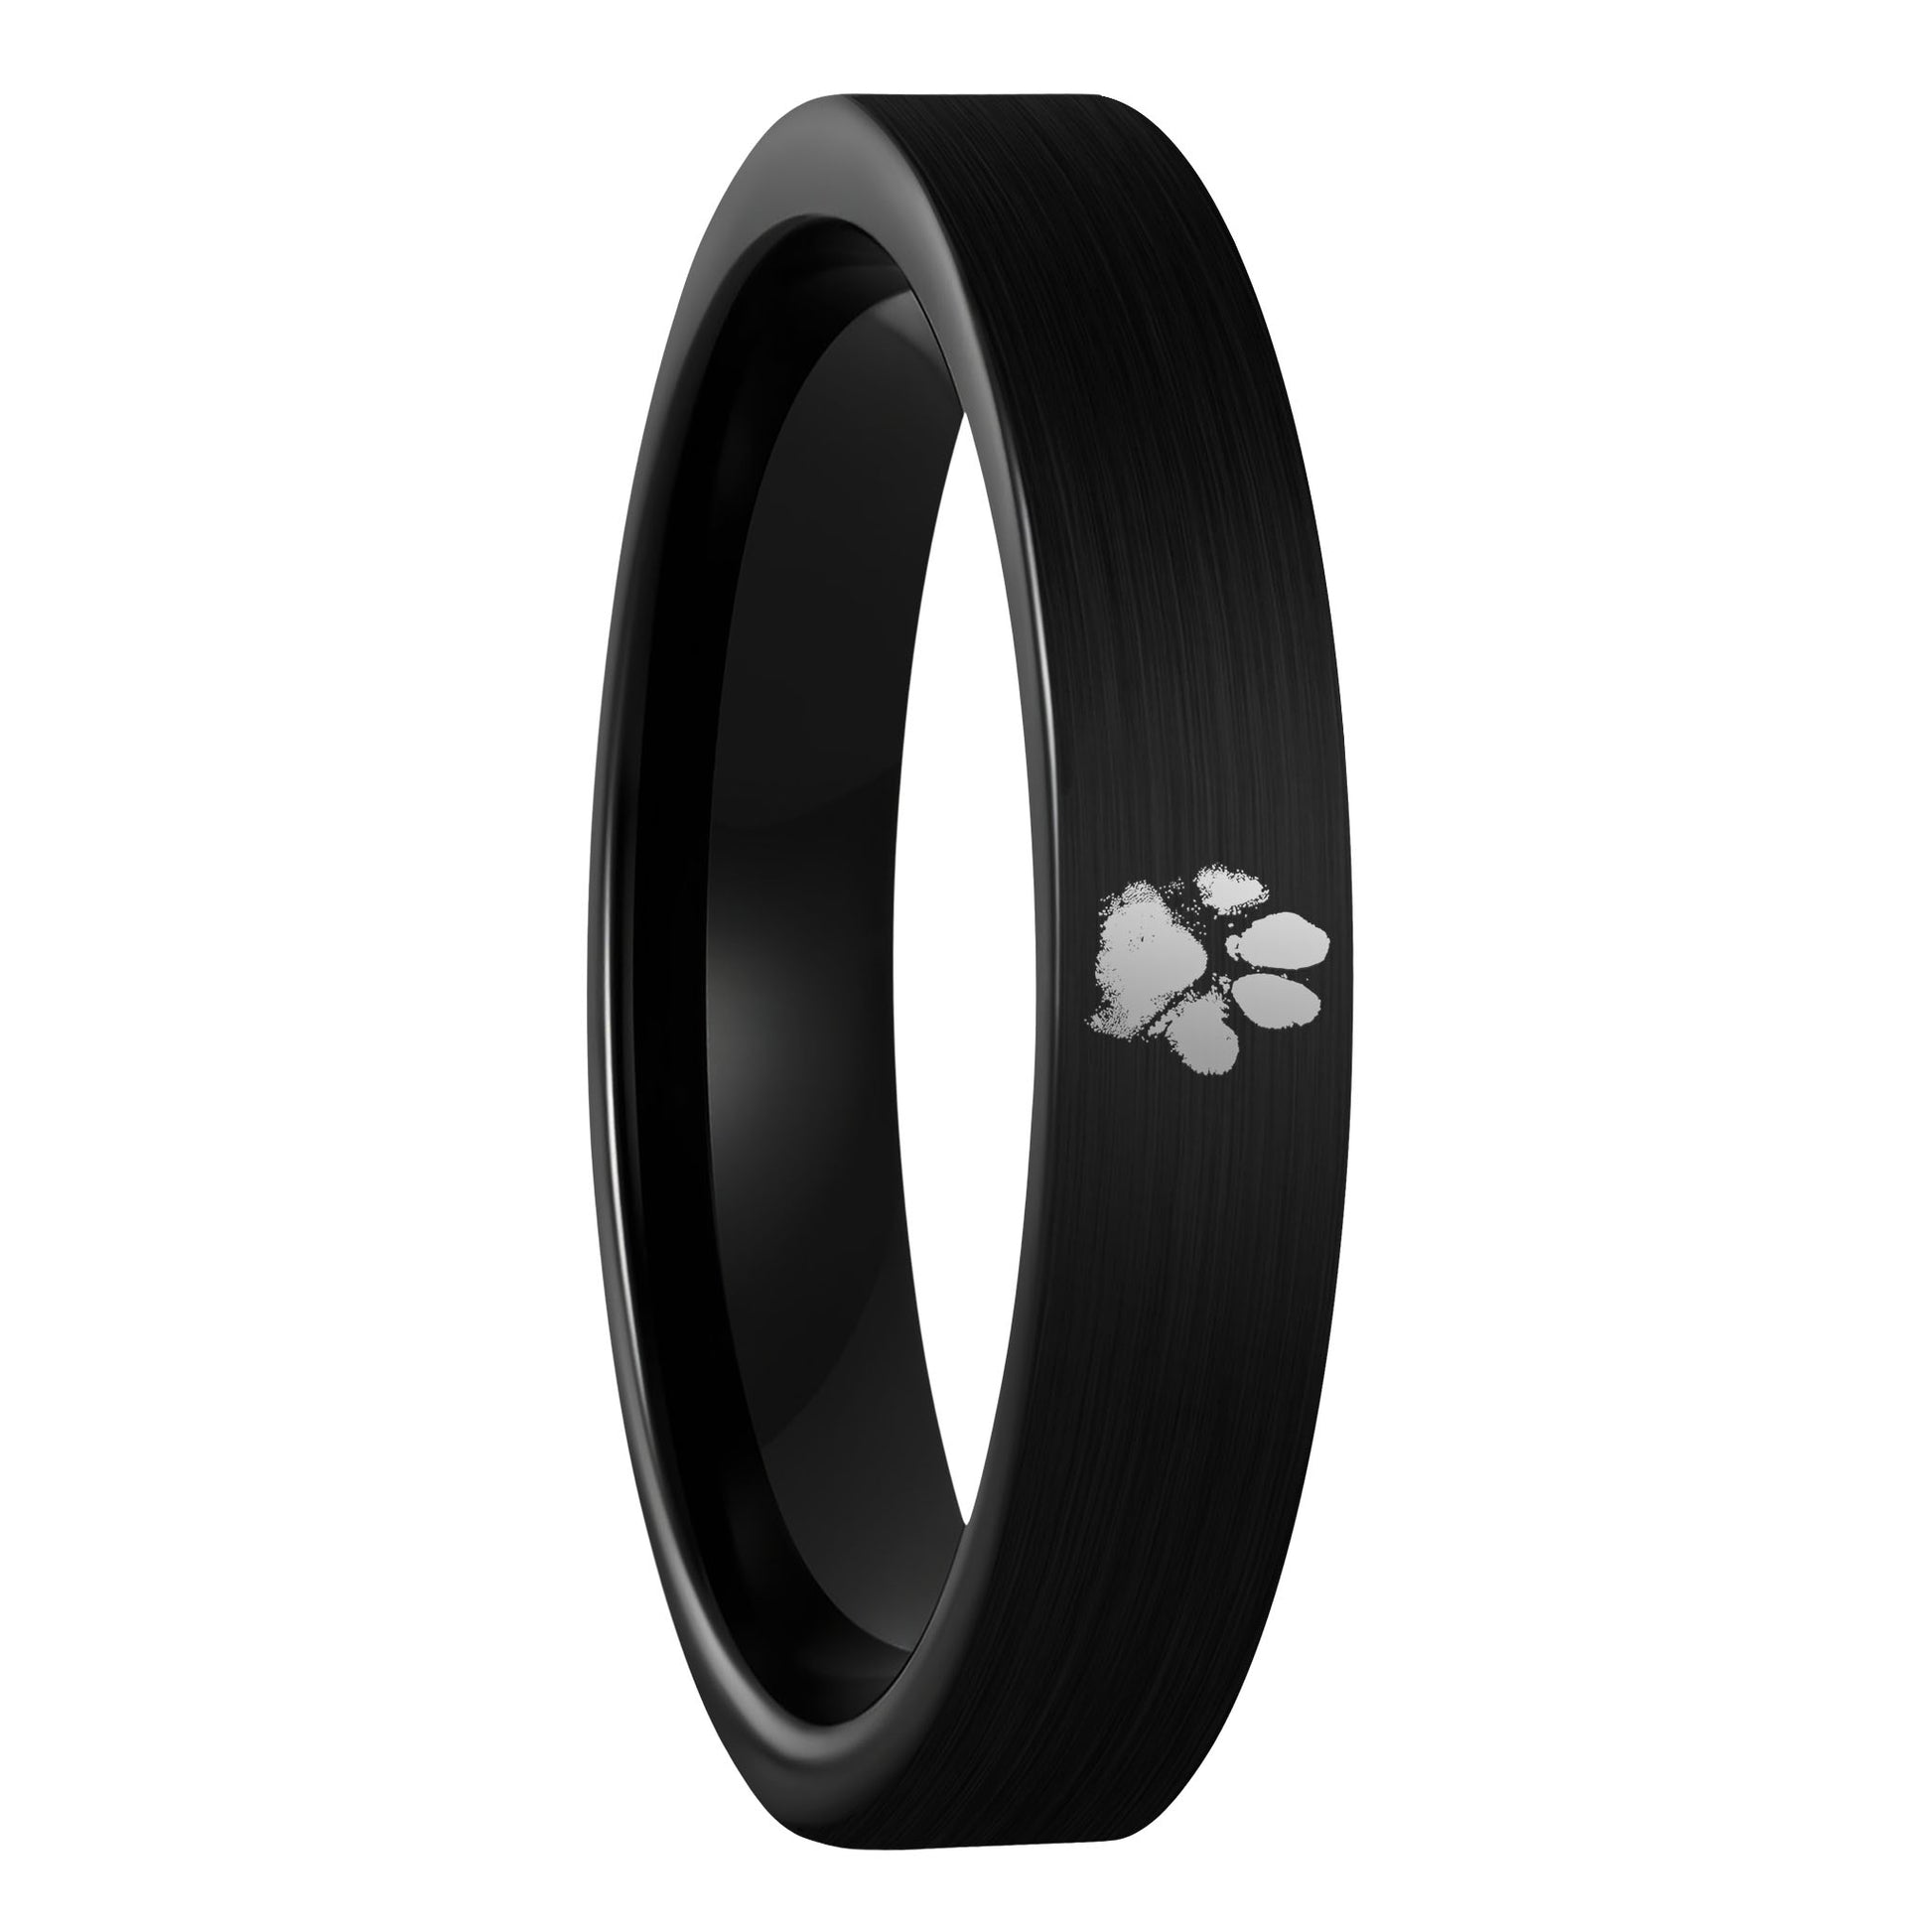 A custom paw print brushed black tungsten women's wedding band displayed on a plain white background.